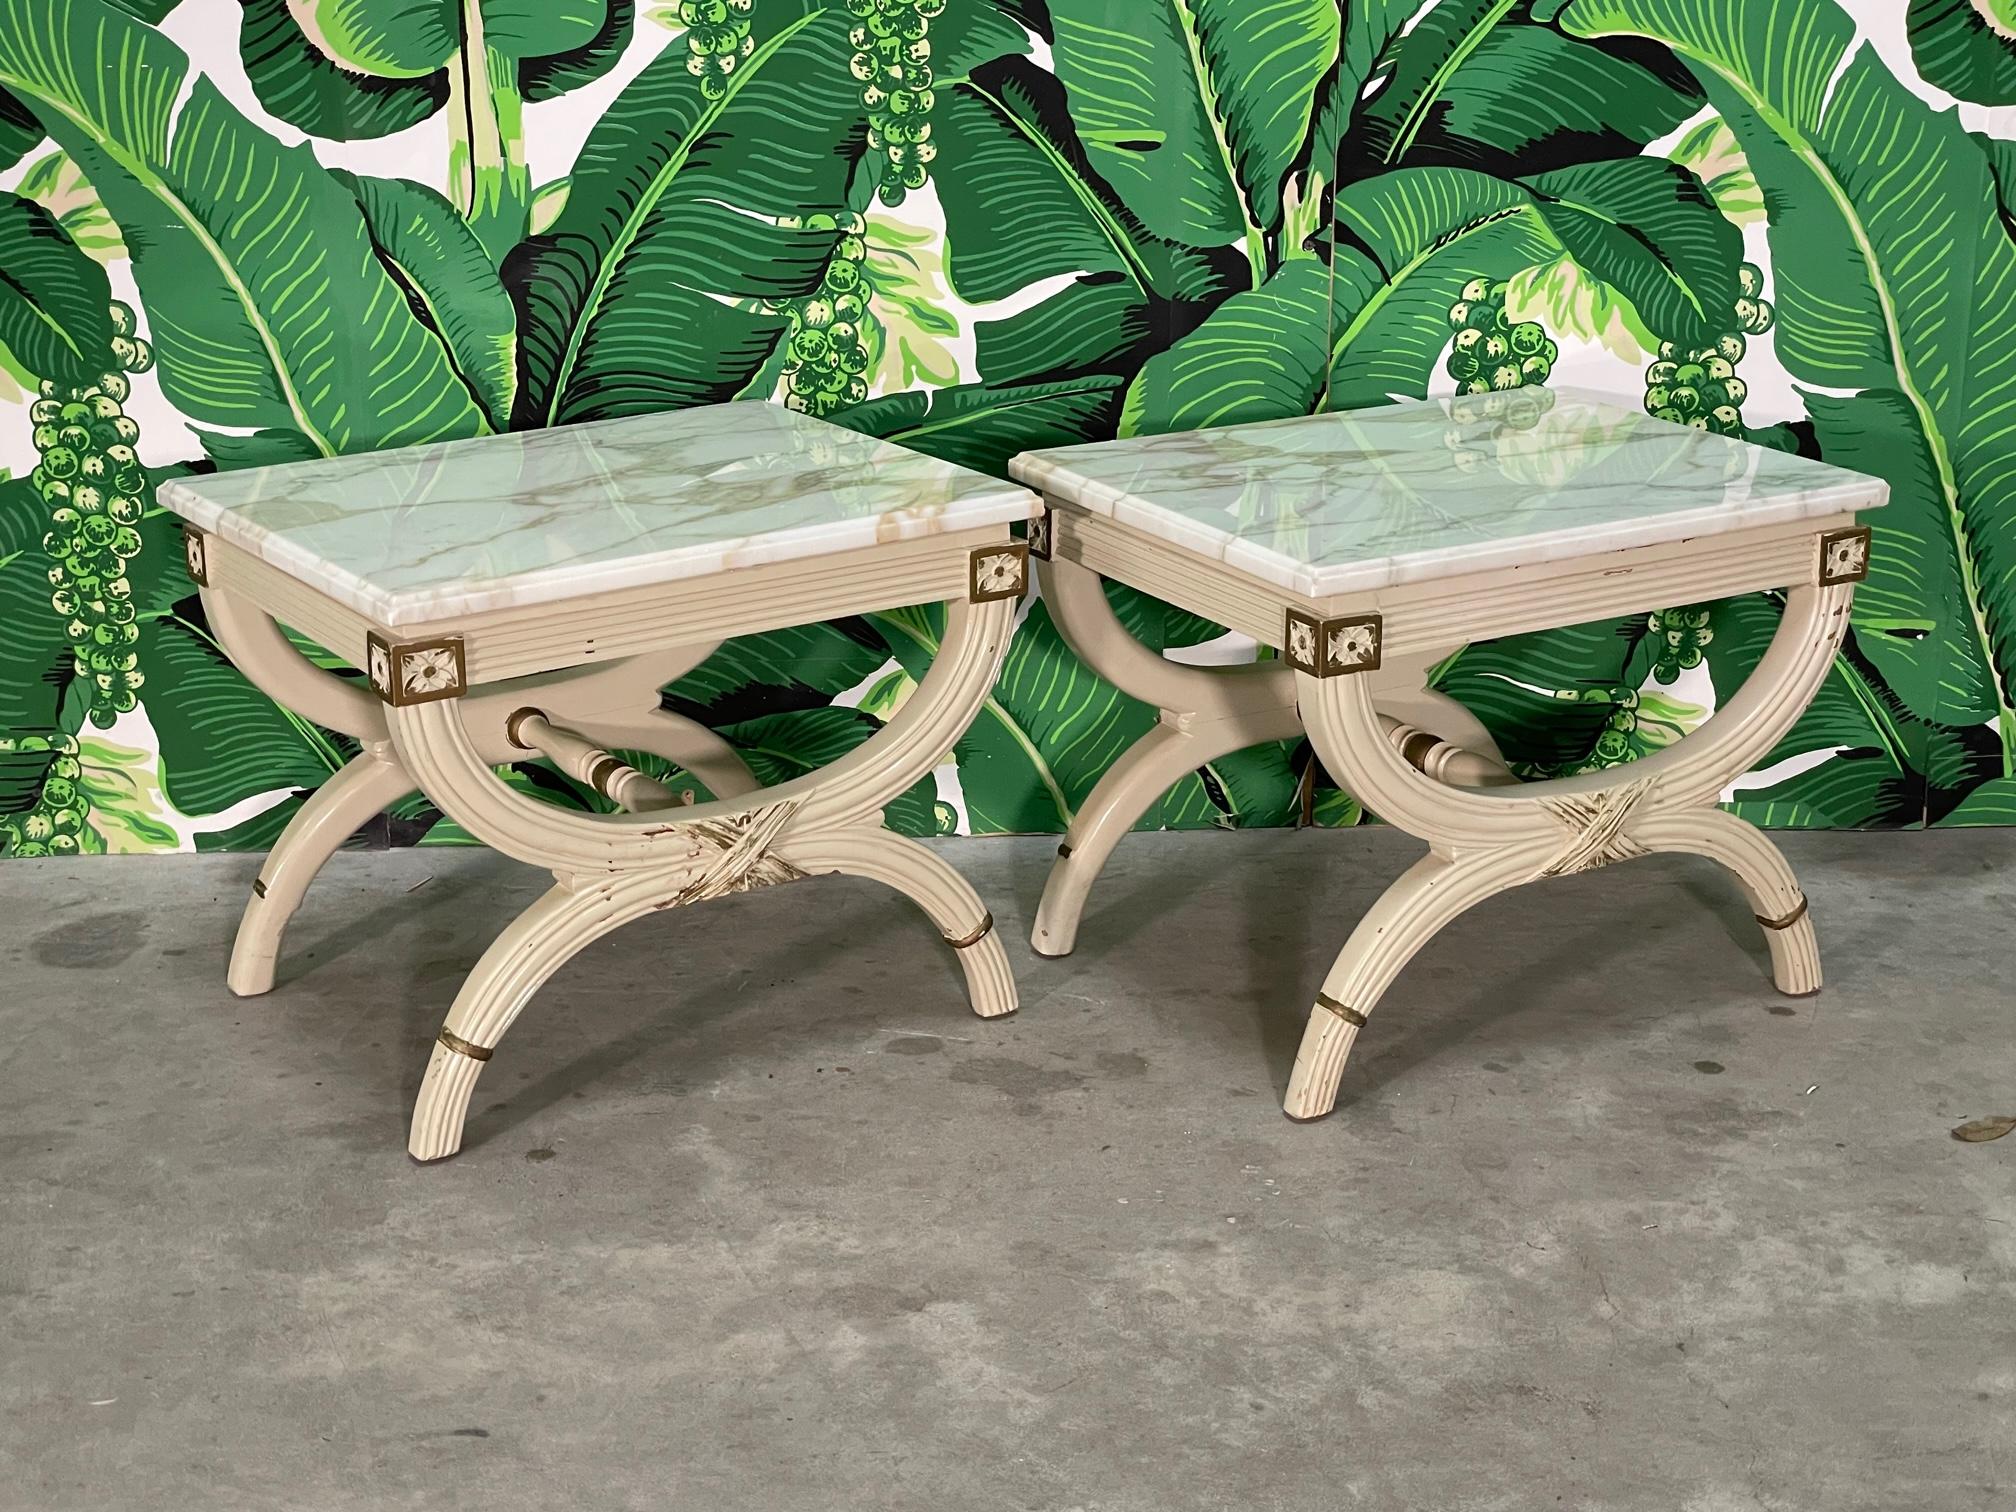 Pair of carved wood end tables feature a marble top and a neoclassical design similar to pieces by Dorothy Draper. Could be used as footstools, marble lifts off and could be replaced by a cushion. Good condition with imperfections consistent with